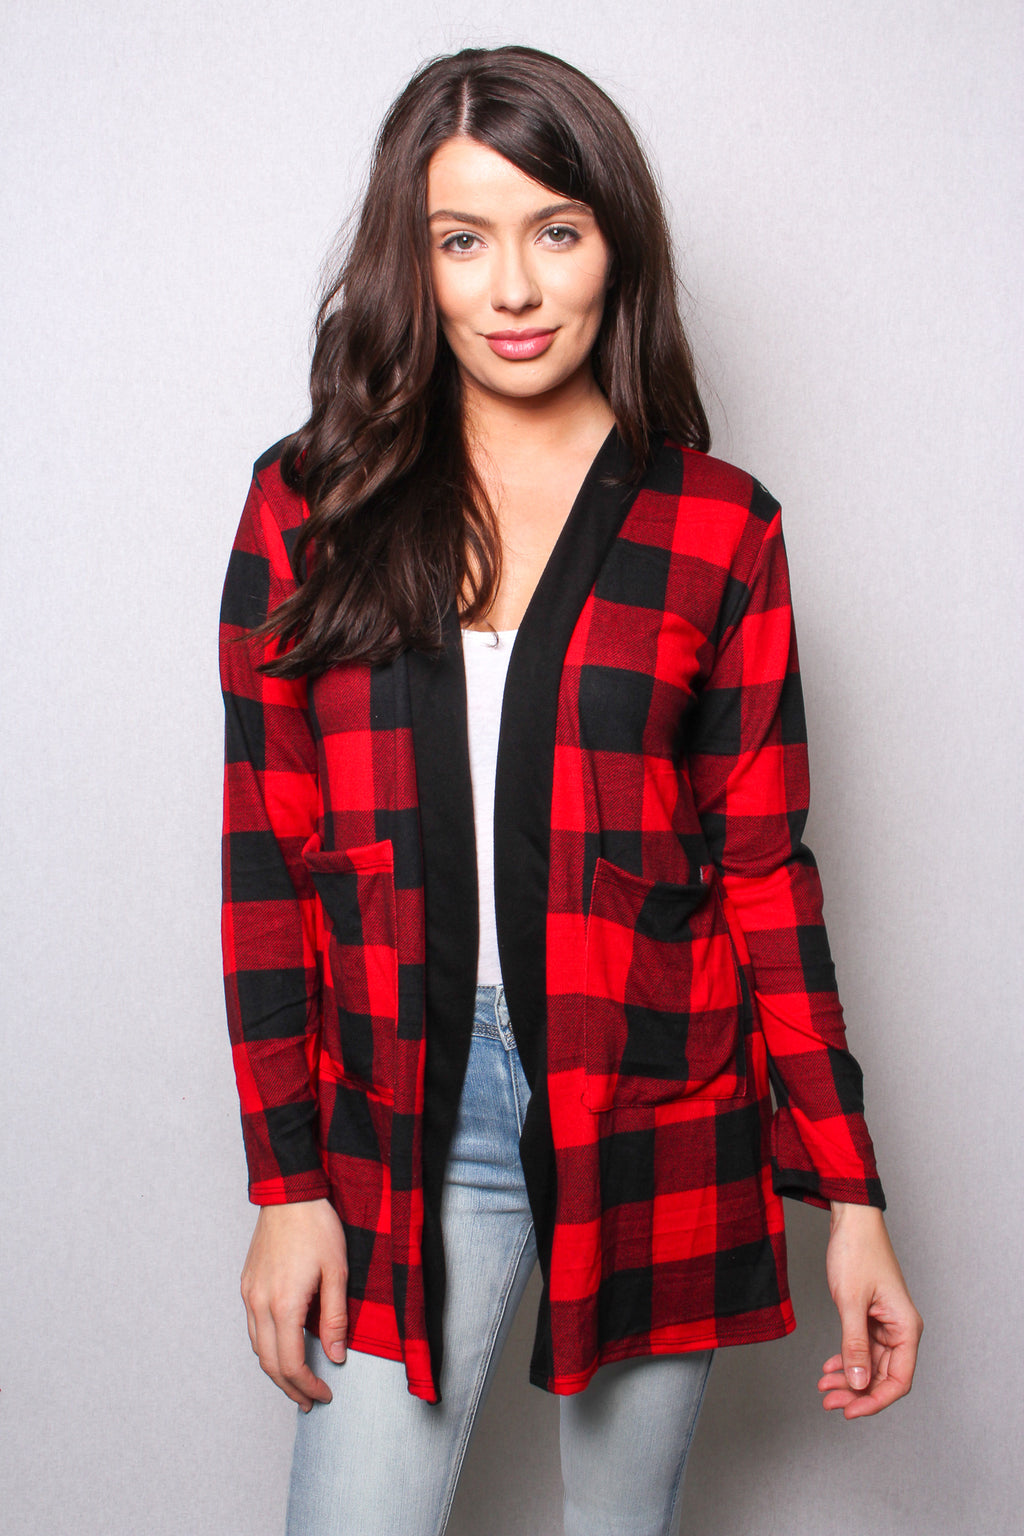 Women's Long Sleeves Checkered Open Front Pocket Cardigan